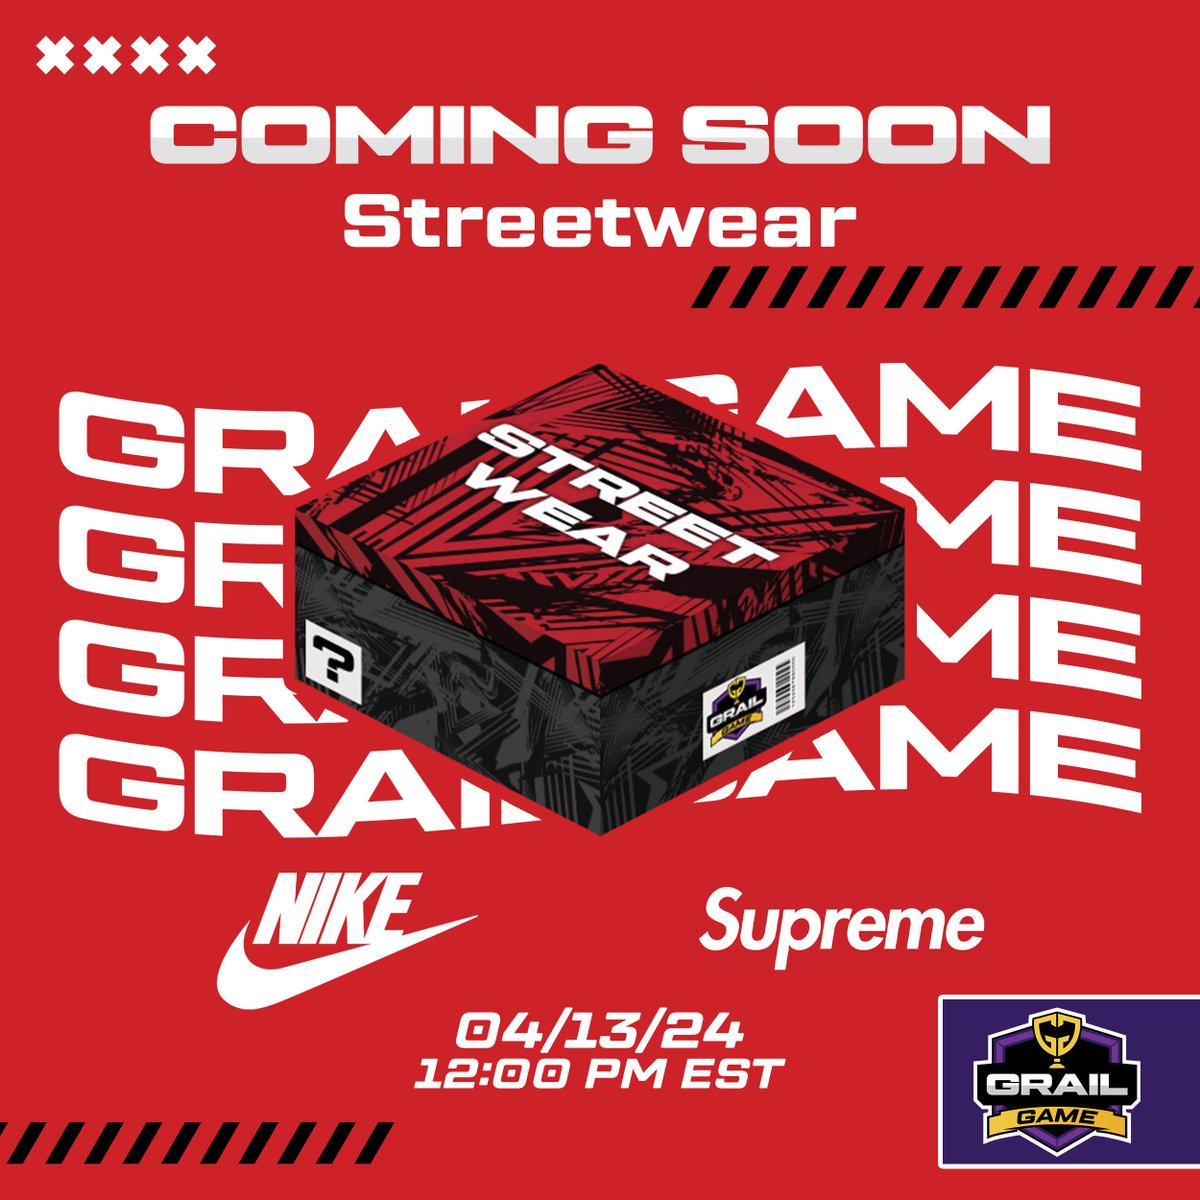 #GrailGamers! #SneakerHeads! If you remember our last #Streetwear #MysteryBox Game, then you sure don't want to miss this next one! 🔥Launching this Saturday, 04/13/24 - 12:00PM EST! 📌

This one is for the #Fashionistas, #Sneakercollectors, and #HypeBeasts! This game has…